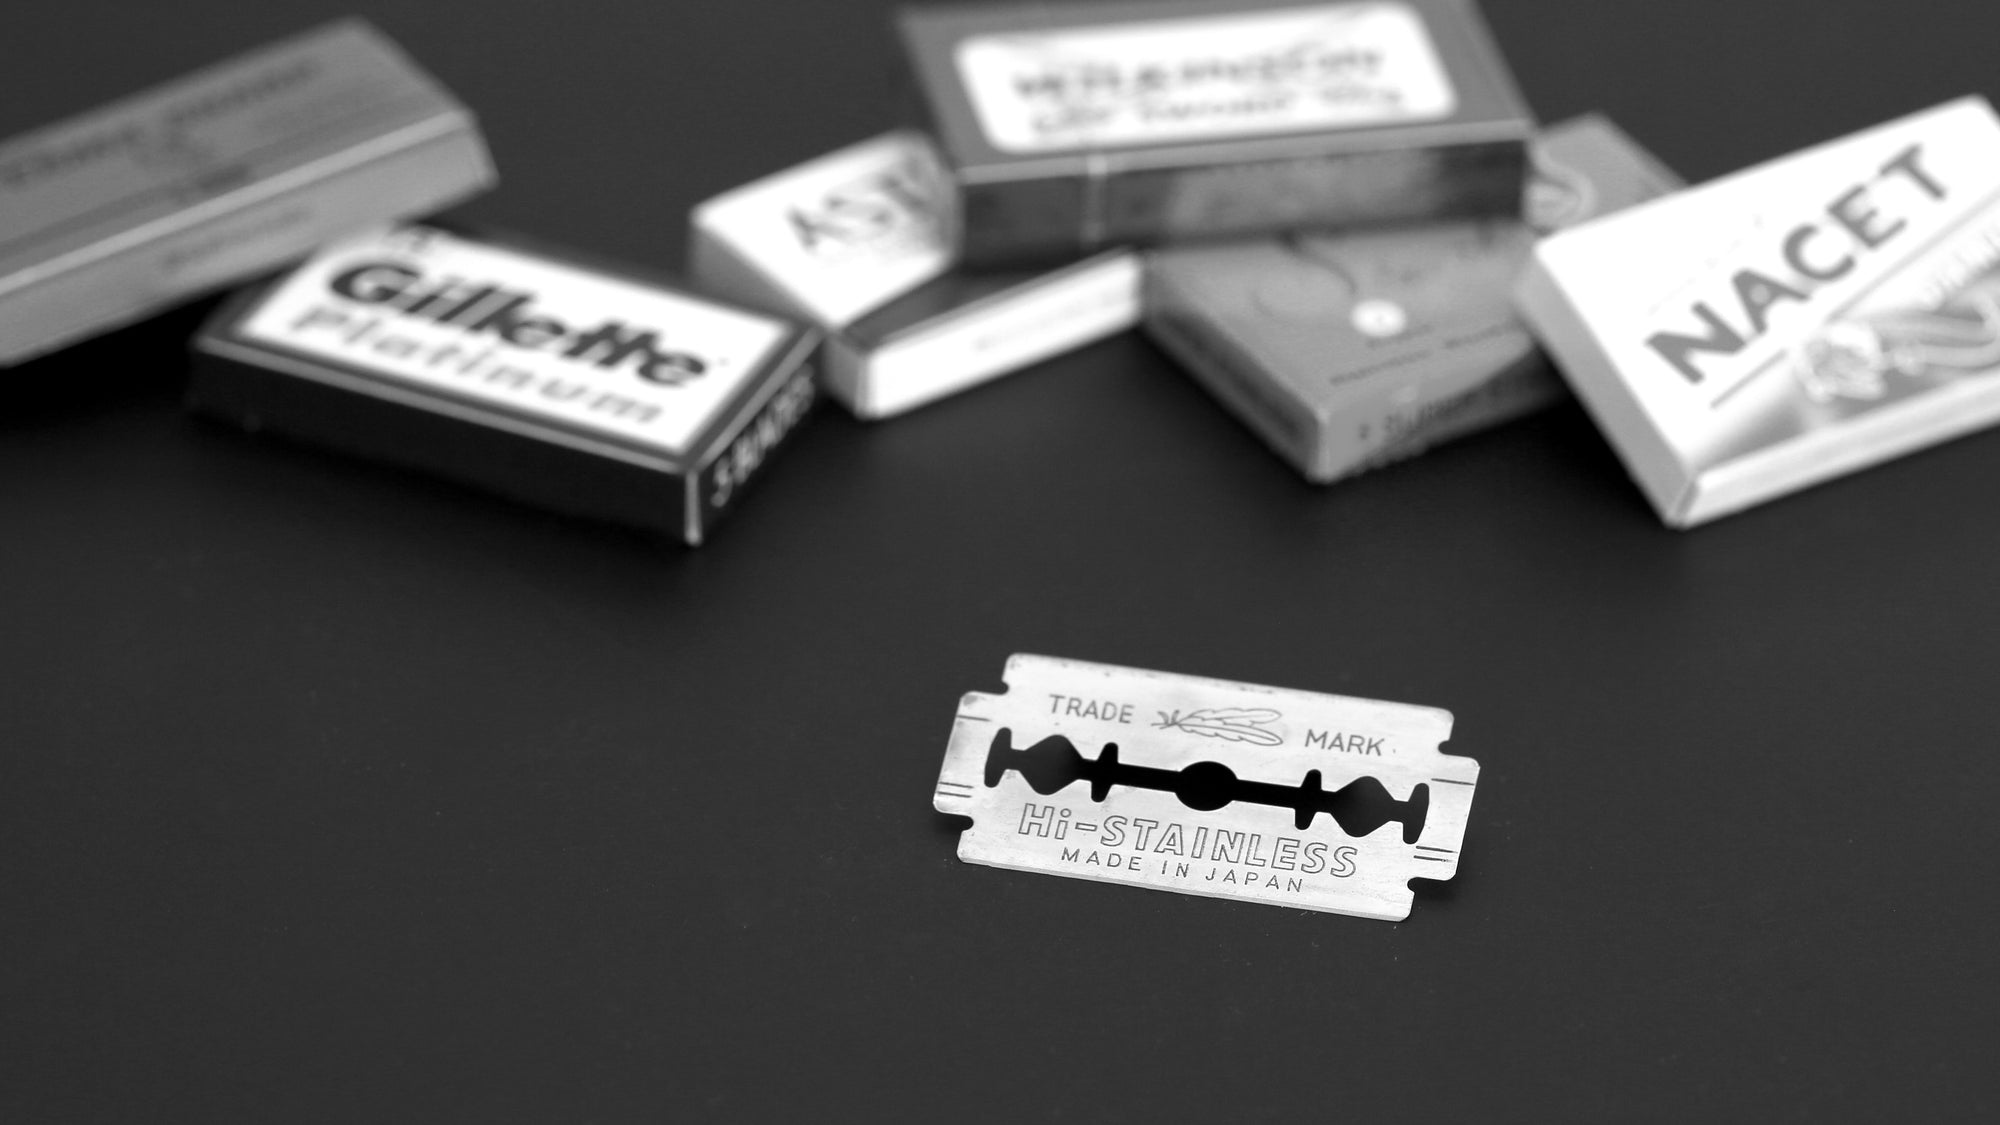 A razor blade on a black background with packs of other brands blurred behind